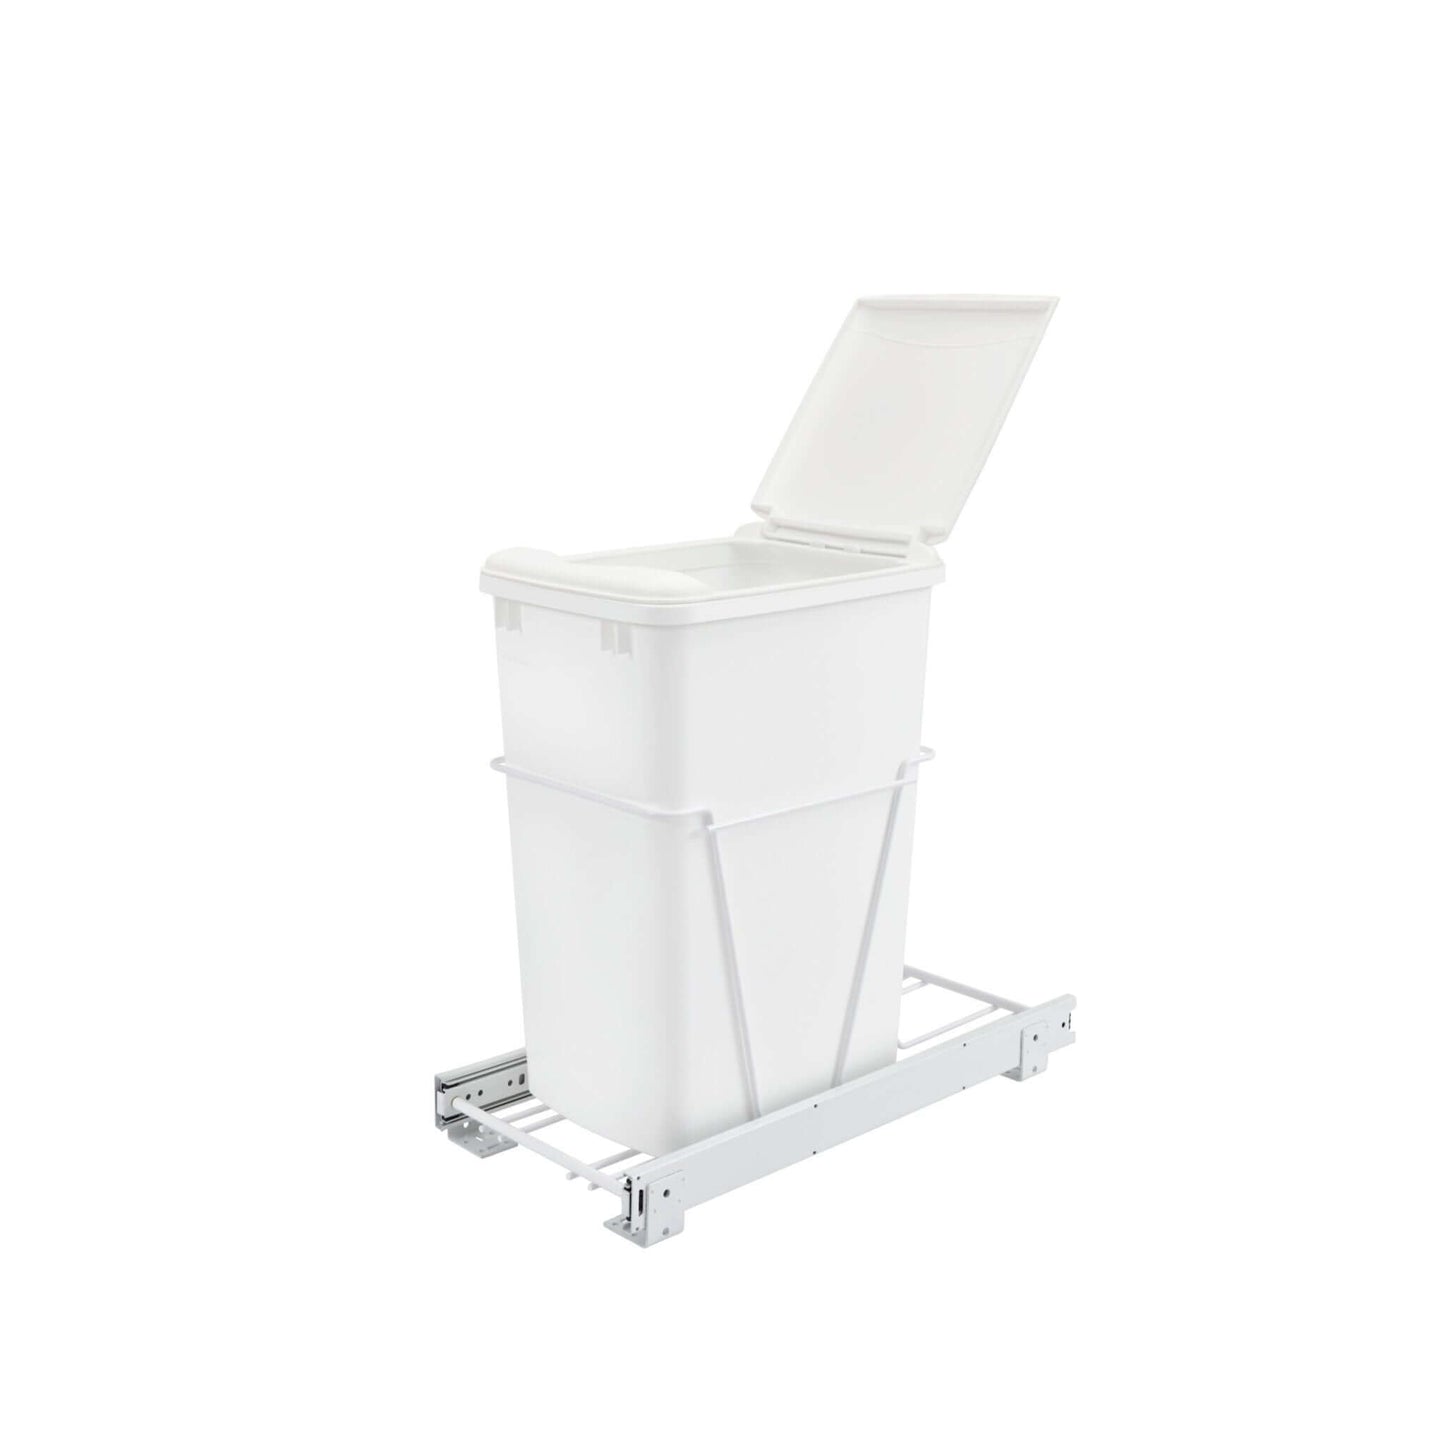 Rev-A-Shelf - White Steel Pull Out Waste/Trash Container w/included lid - RV-12PB-L